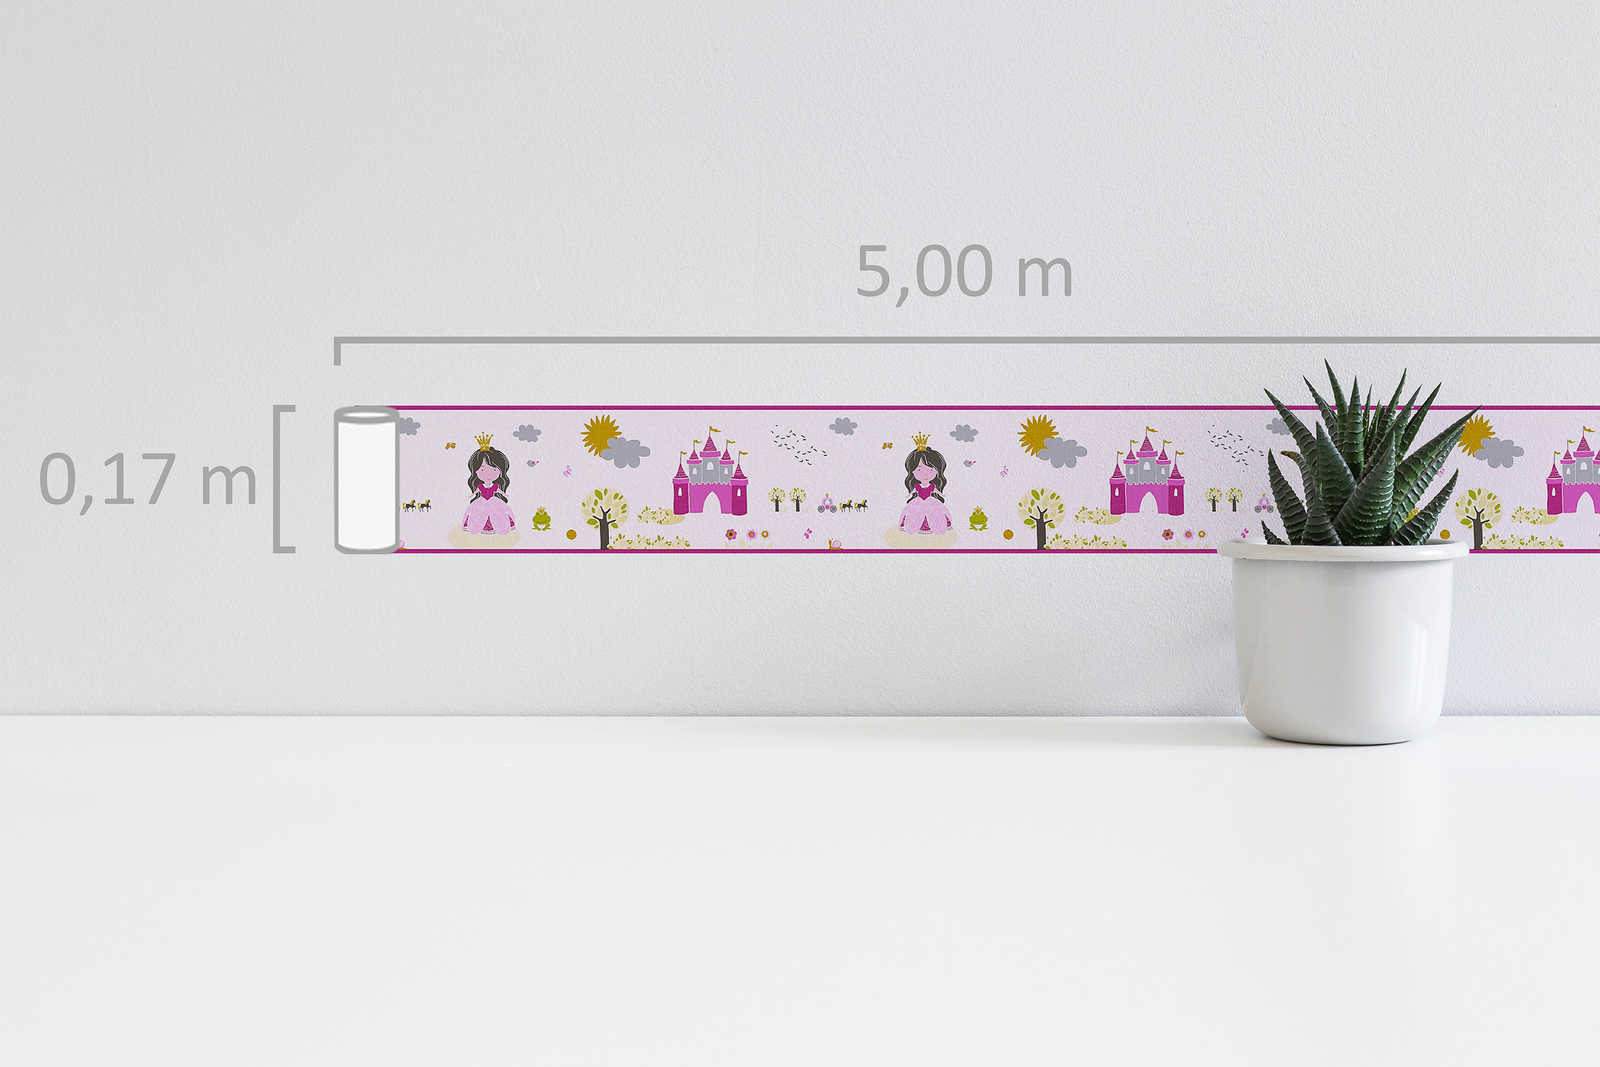             Nursery border with fairy tale motif - Colorful, Pink
        